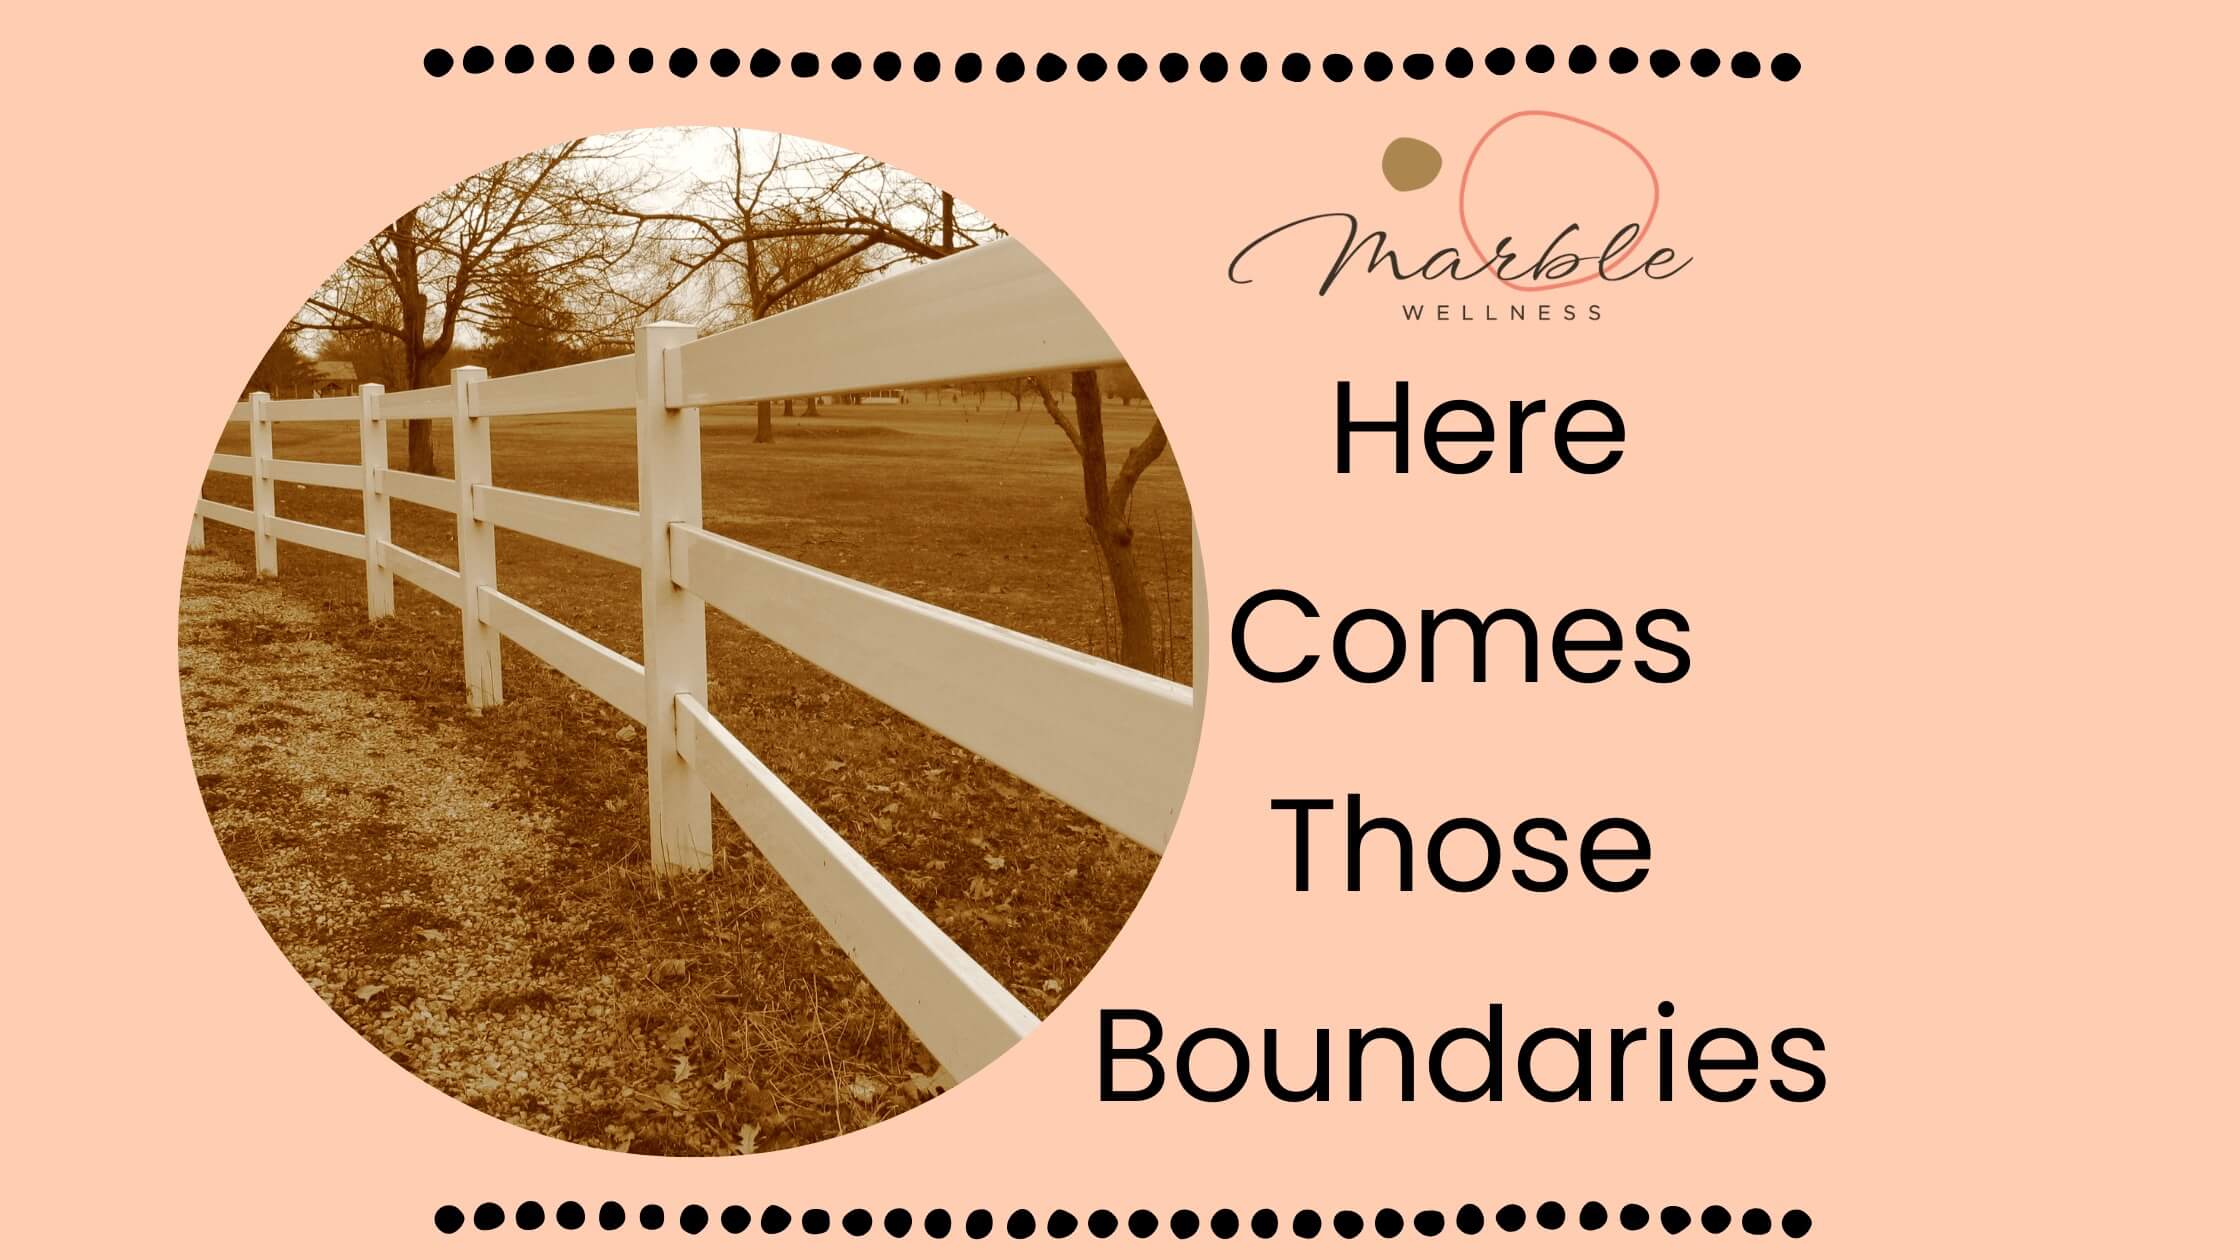 Photo of Chicago white fence with text: "Here Comes Those Boundaries". Tips from a West Loop Chicago therapist may help you find healing from burnout, anxiety, relationship issues, and more.